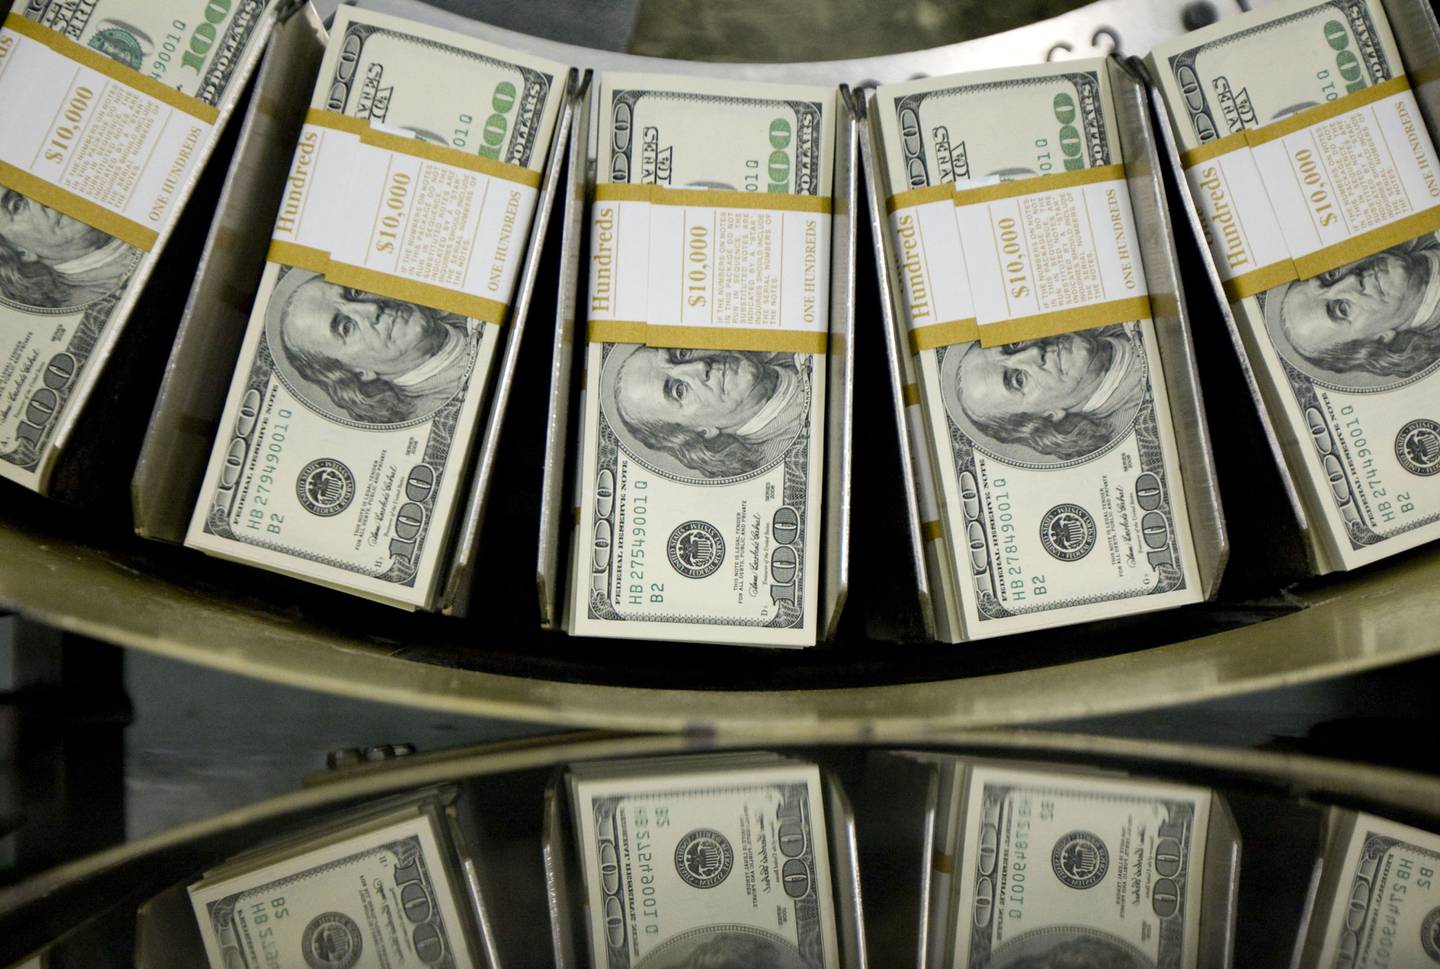 Stacks of one hundred dollar bills pass through a circulator machine at the Bureau of Engraving and Printing in Washington, D.C., U.S., on Wednesday, Oct. 14, 2009.dfd